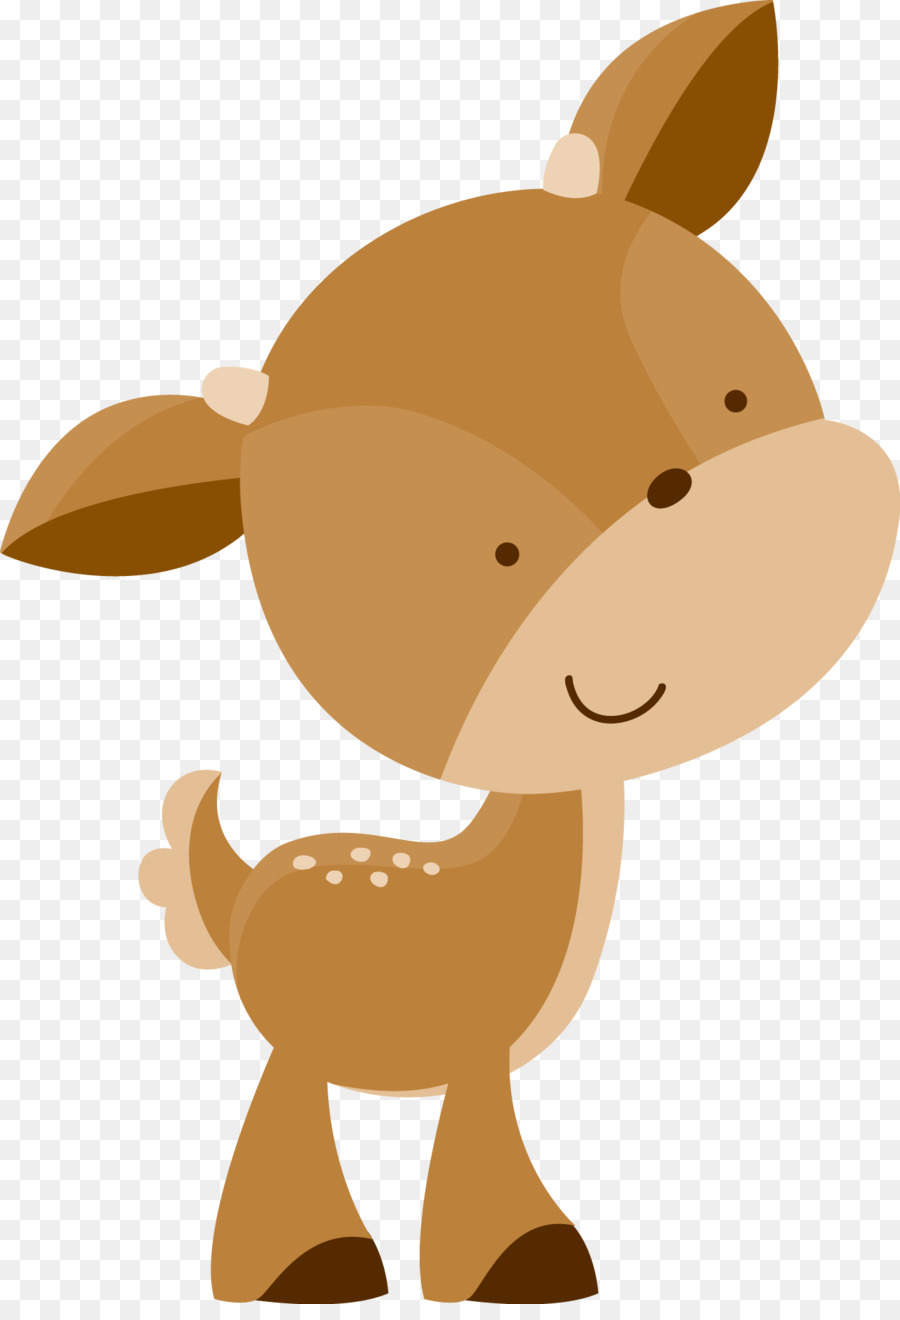 White-tailed deer Cuteness Clip art - woodland png download - 1261*1827 - Free Transparent Deer png Download.